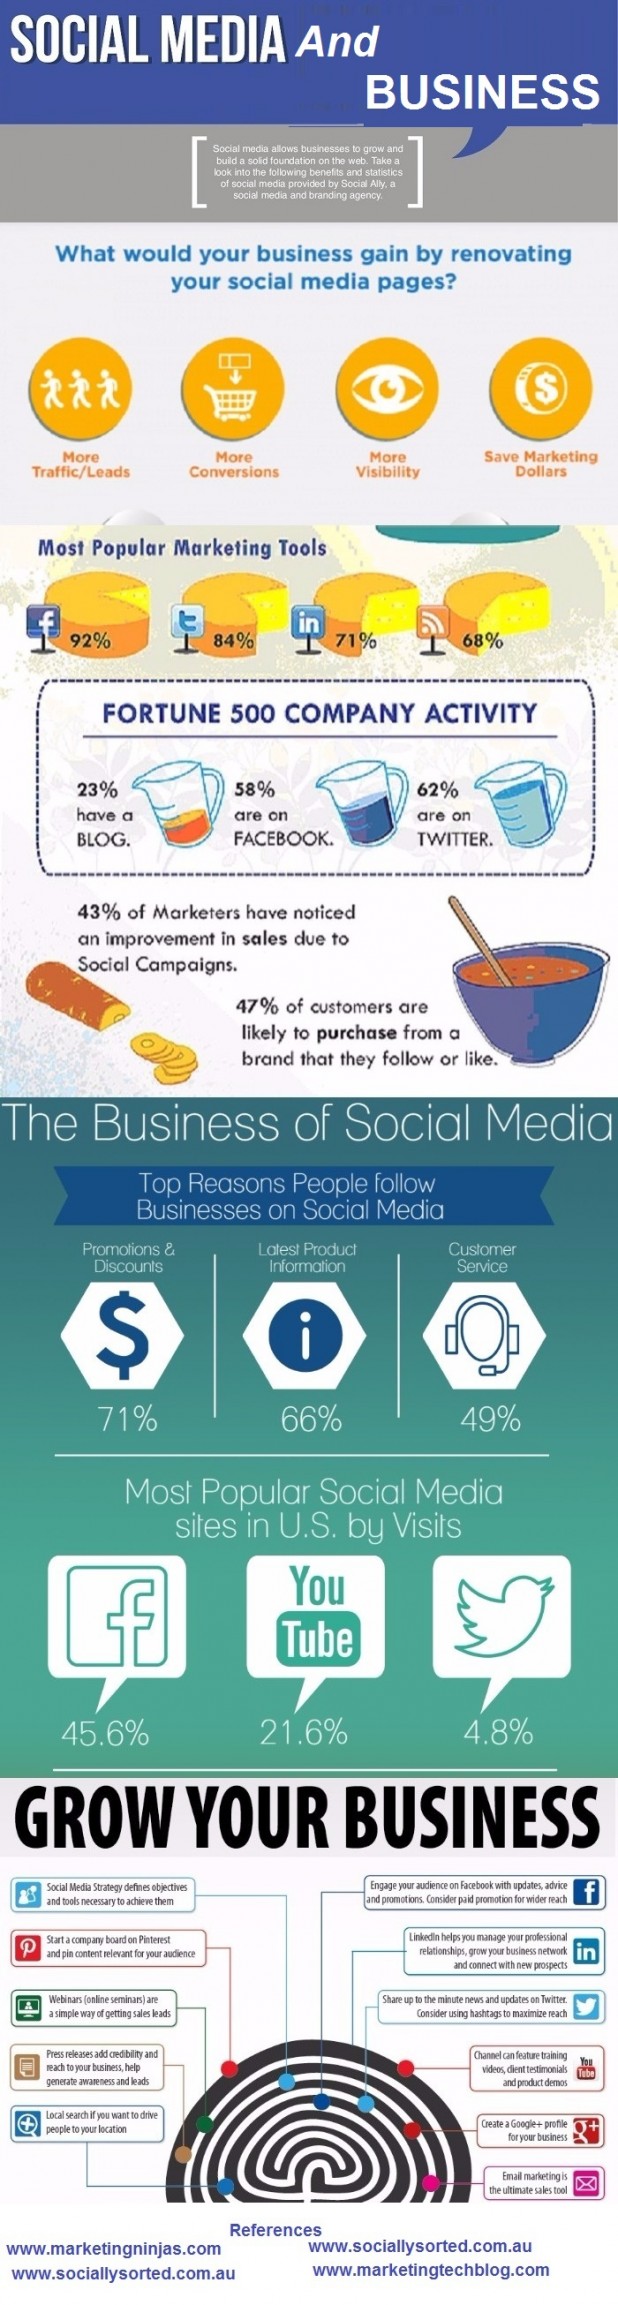 Social Media and Business- Infographic